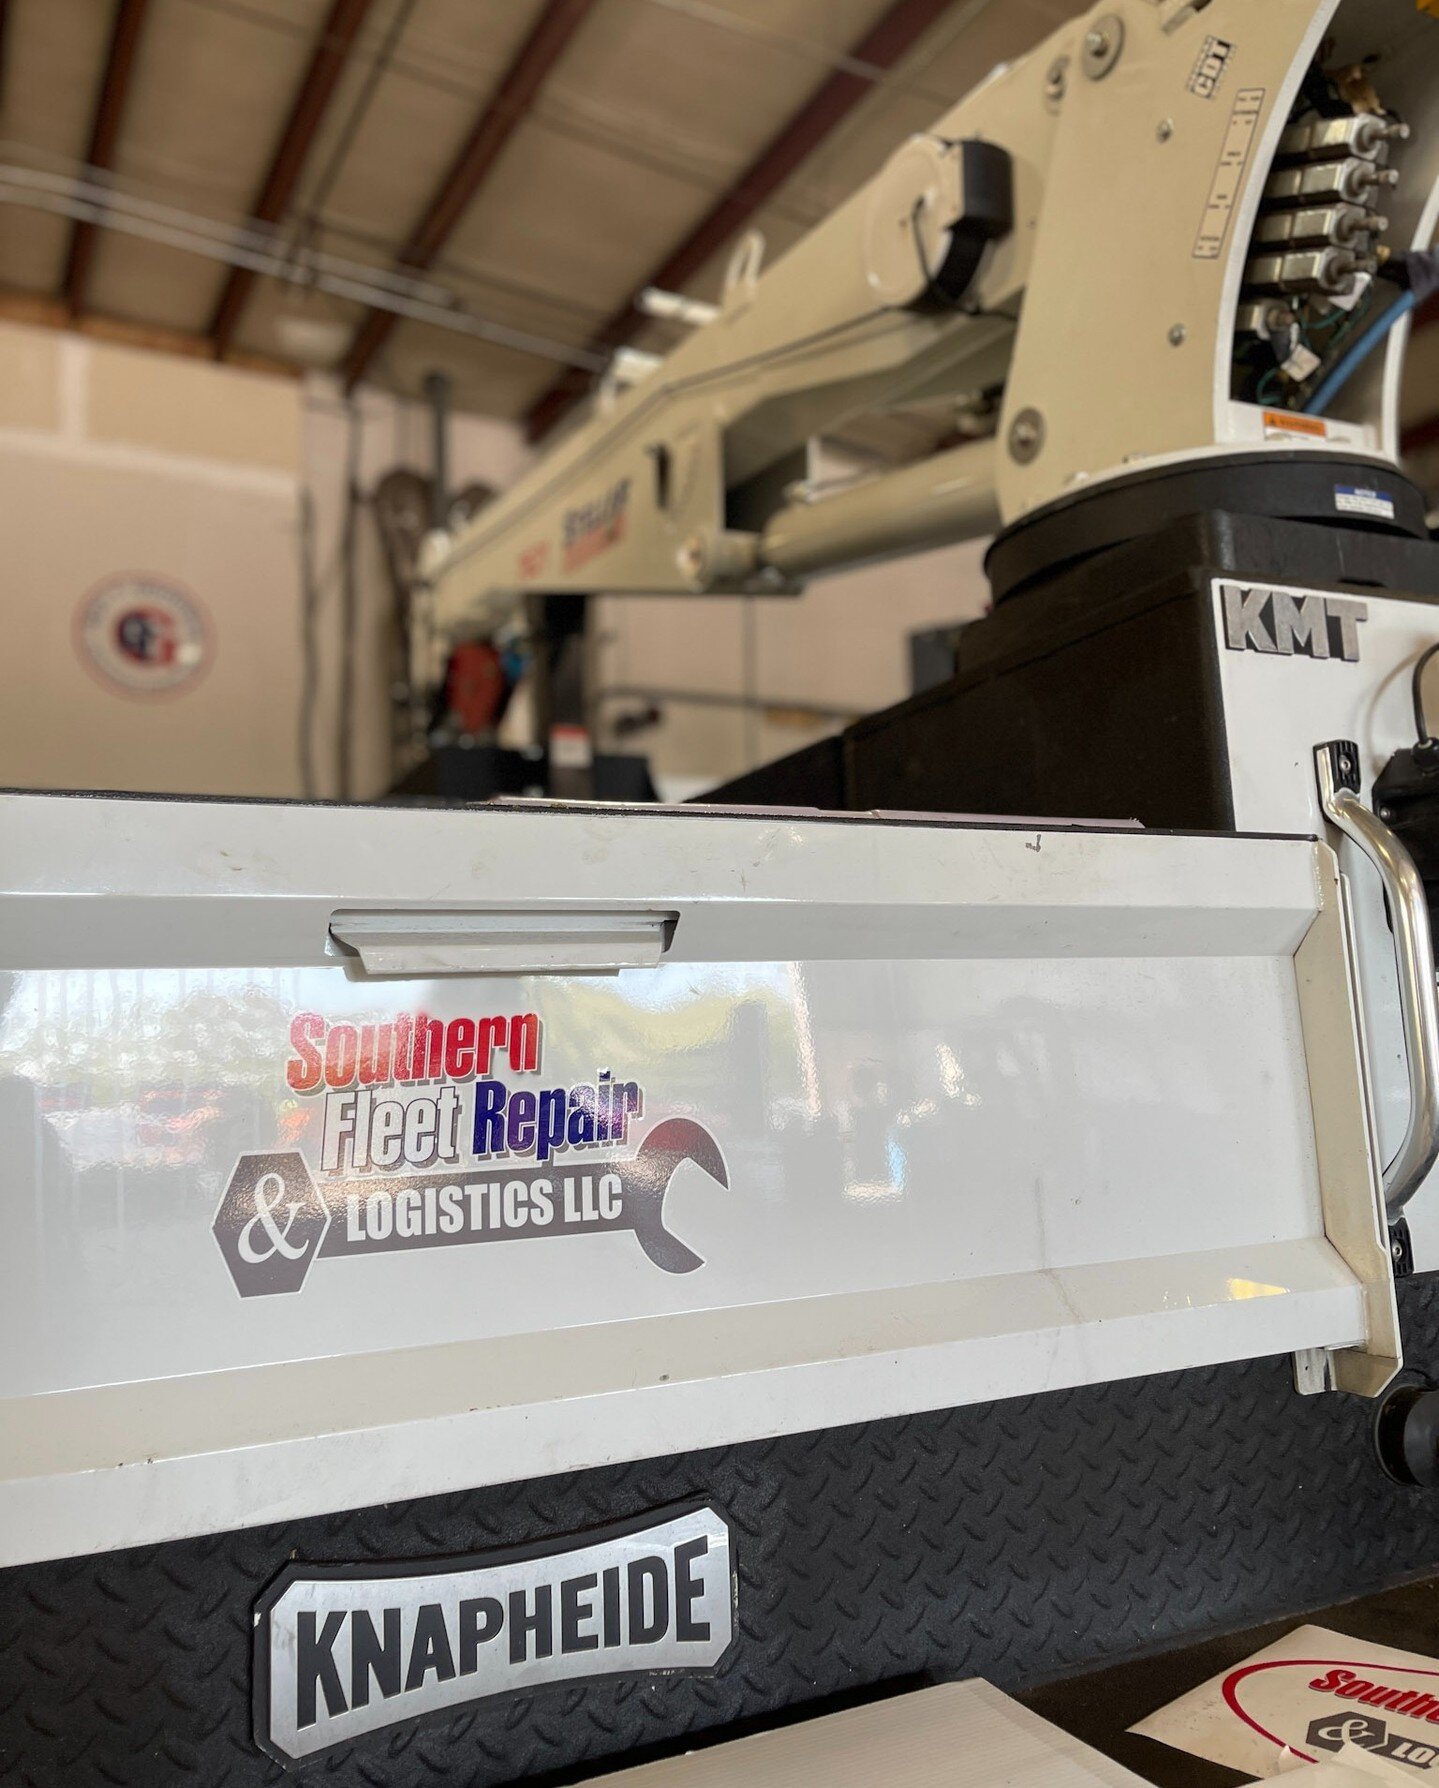 What can we help your business with today?

Call us for more information, custom pricing for your business and more. We would be happy to take a burden off of you.

#southernfleetrepair #mechanicalissue #equipmentrepair #nashvillefleet #nashvillemech